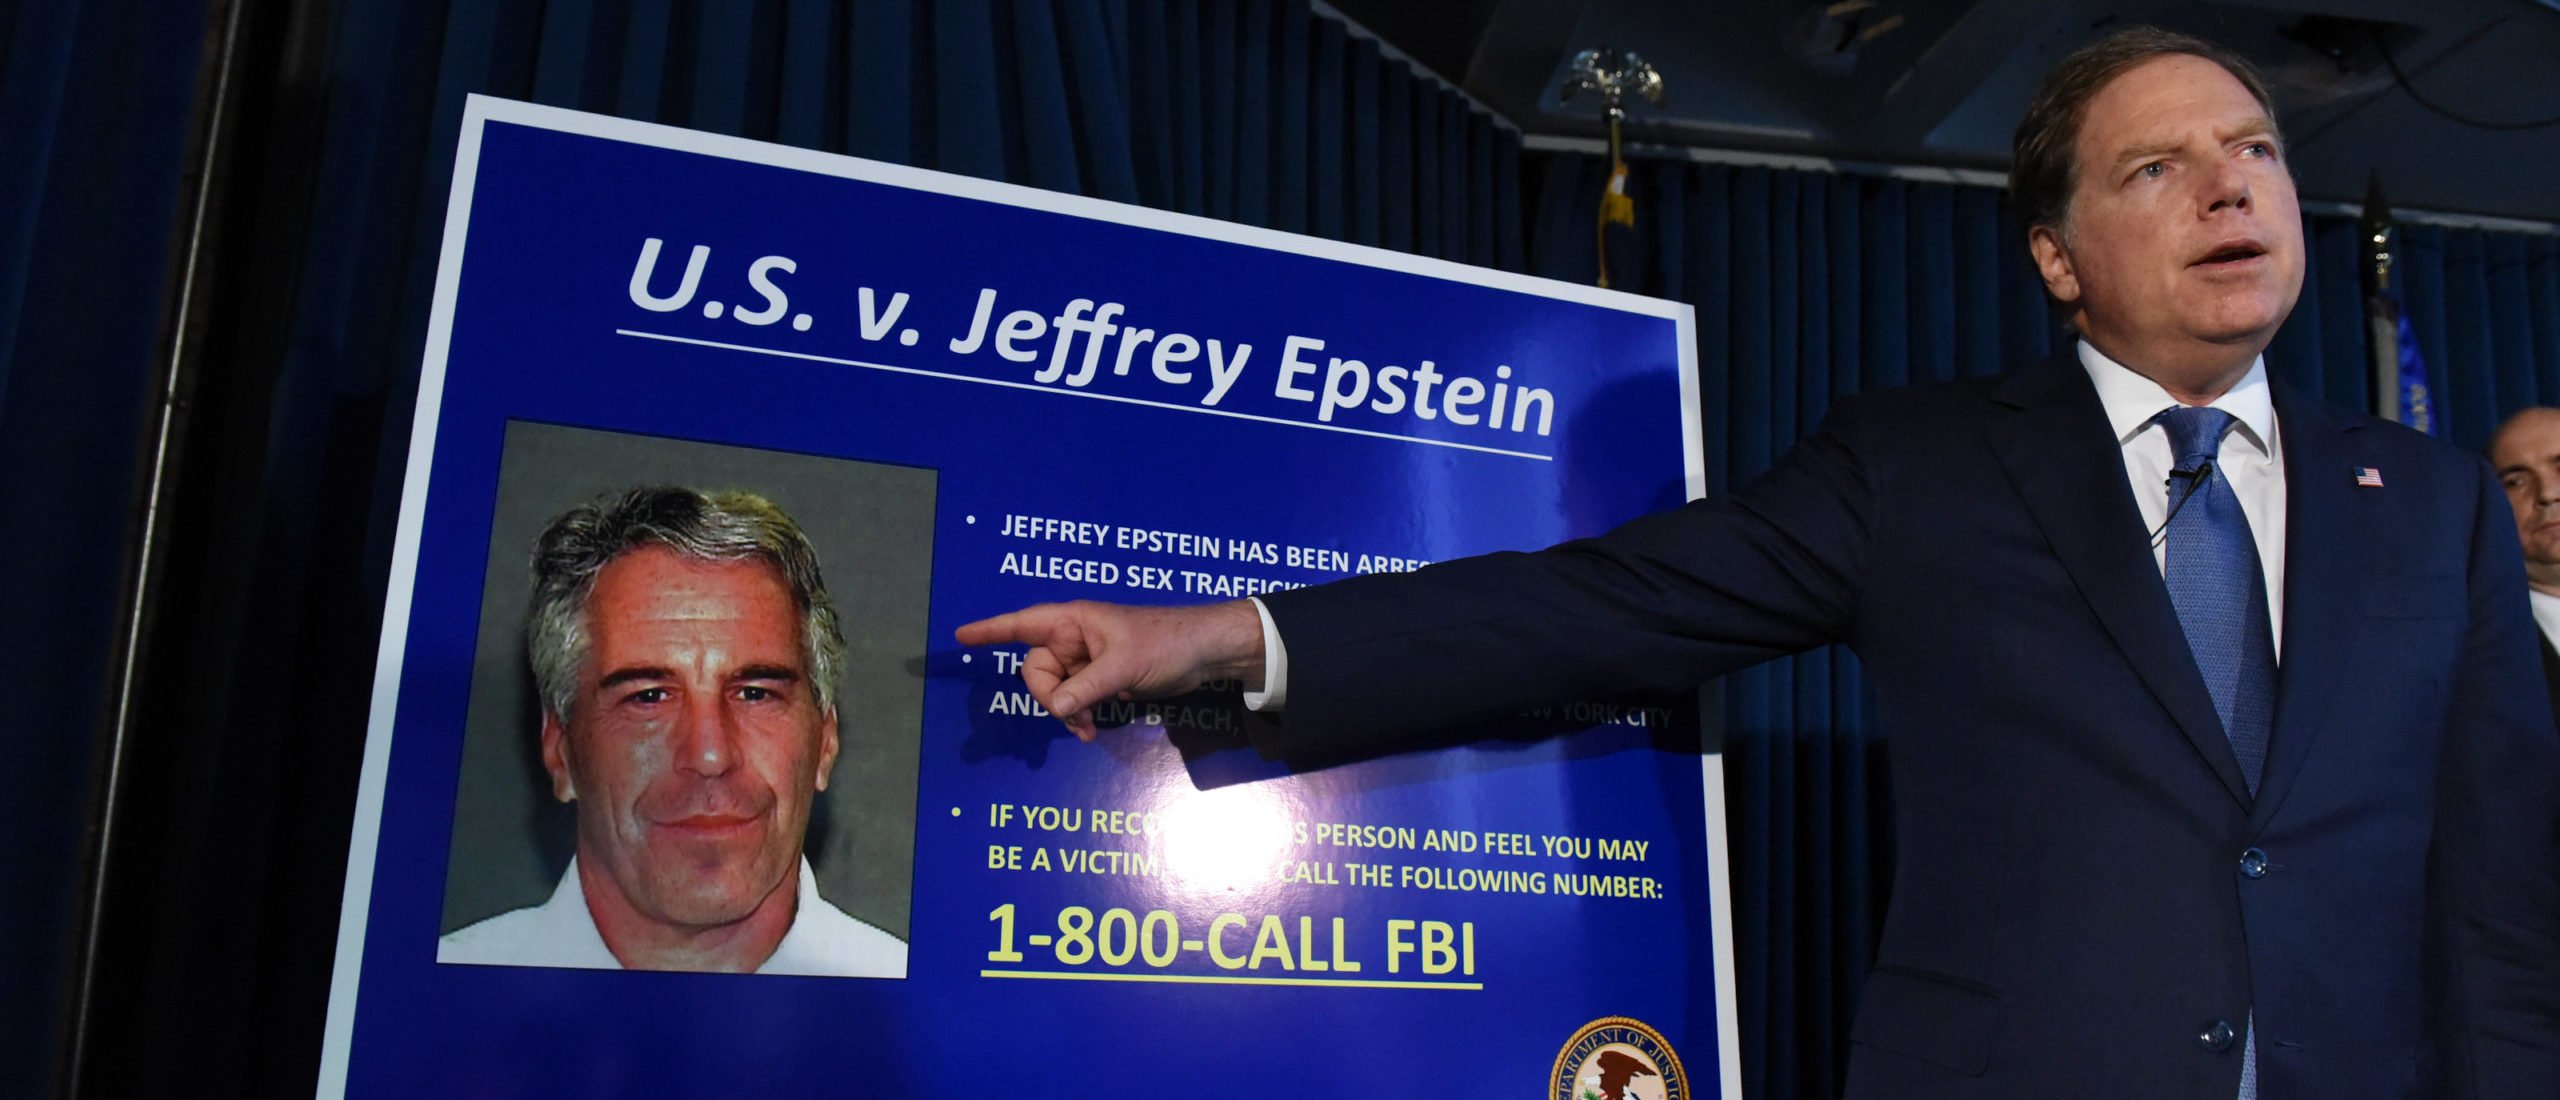 FAA Accidentally Reveals 704 Previously Unknown Epstein Flights | The Daily Caller